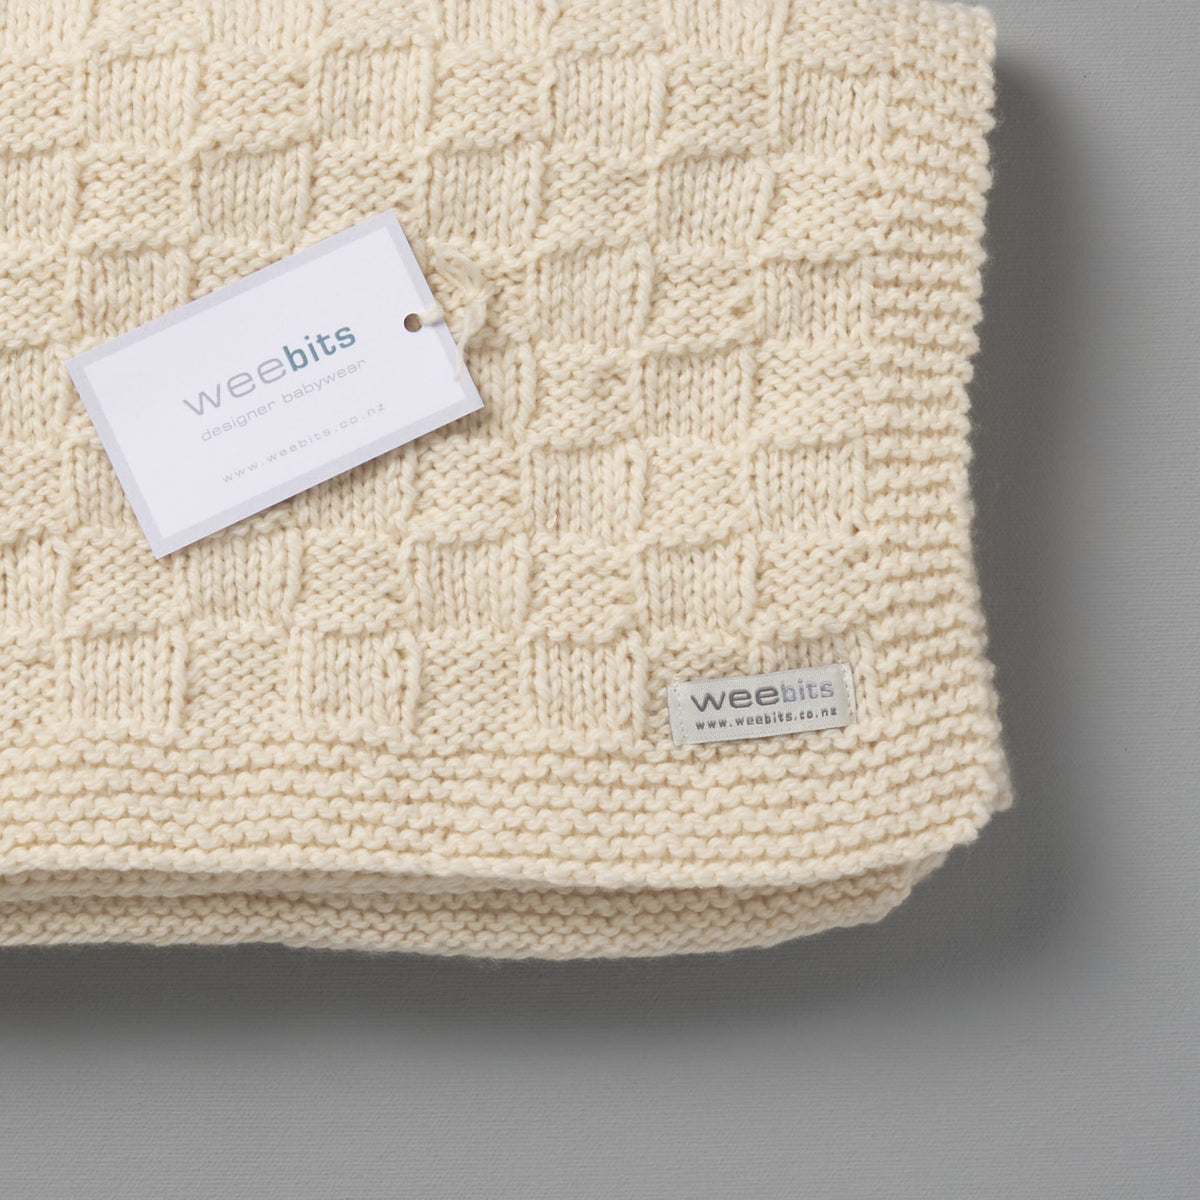 A white Hand Knitted Travel Rug - Natural with a tag on it, perfect for keeping babies warm and cozy. (Brand Name: Weebits)